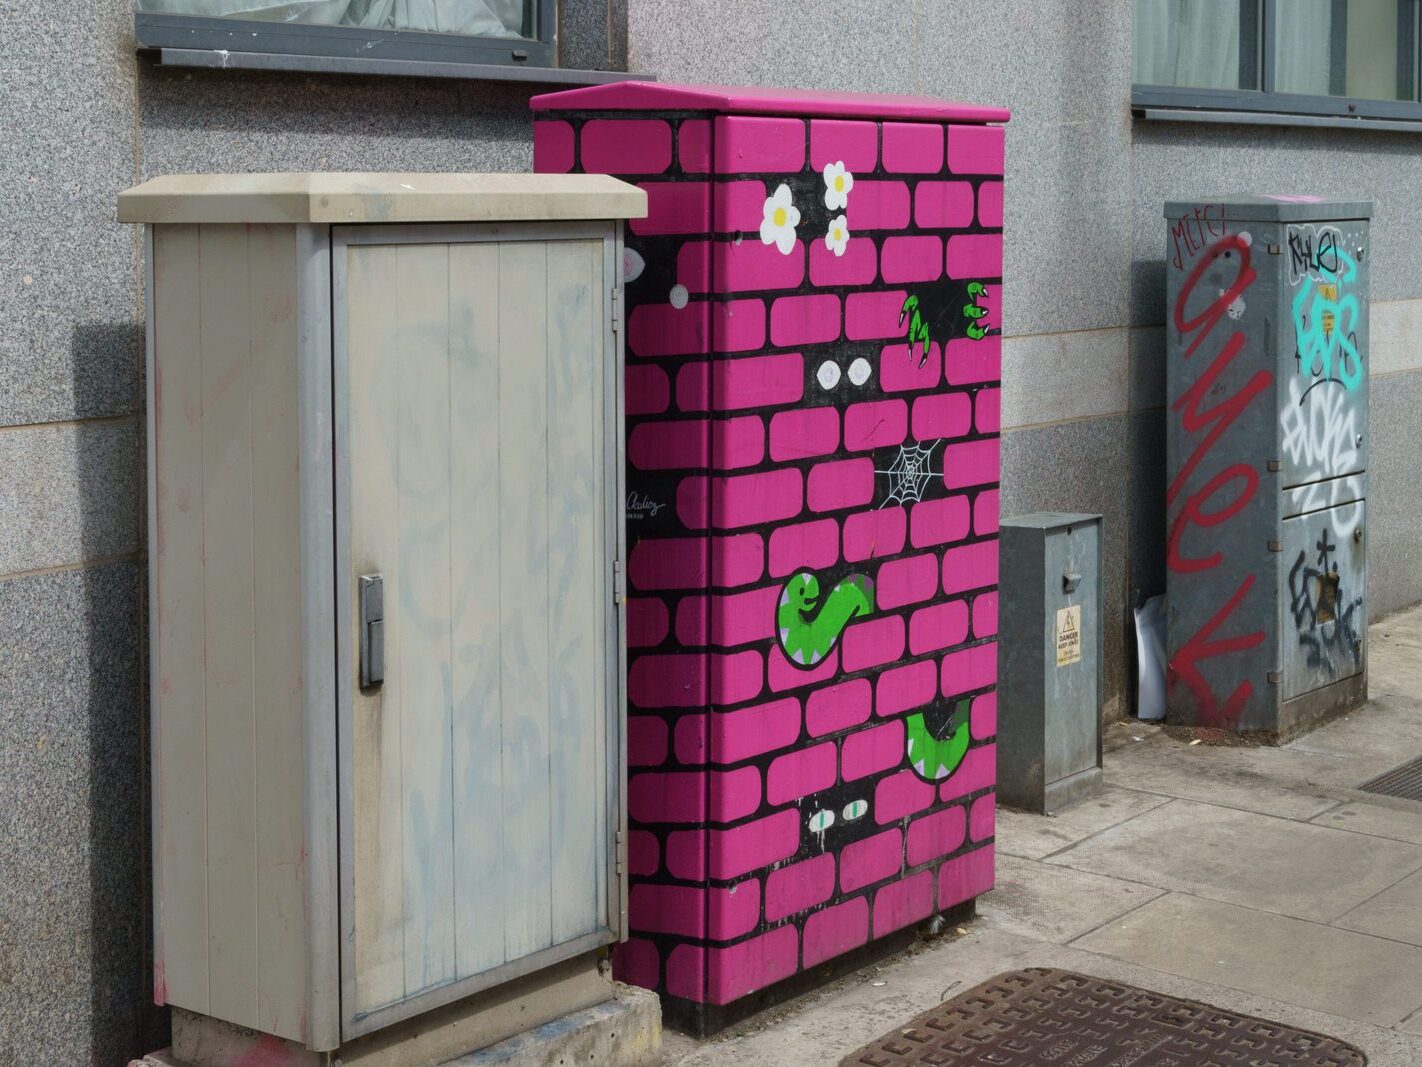 MORE PAINT-A-BOX STREET ART BY BY MARTA OKUKICZ [A TALE IN THE WALL]-236747-1